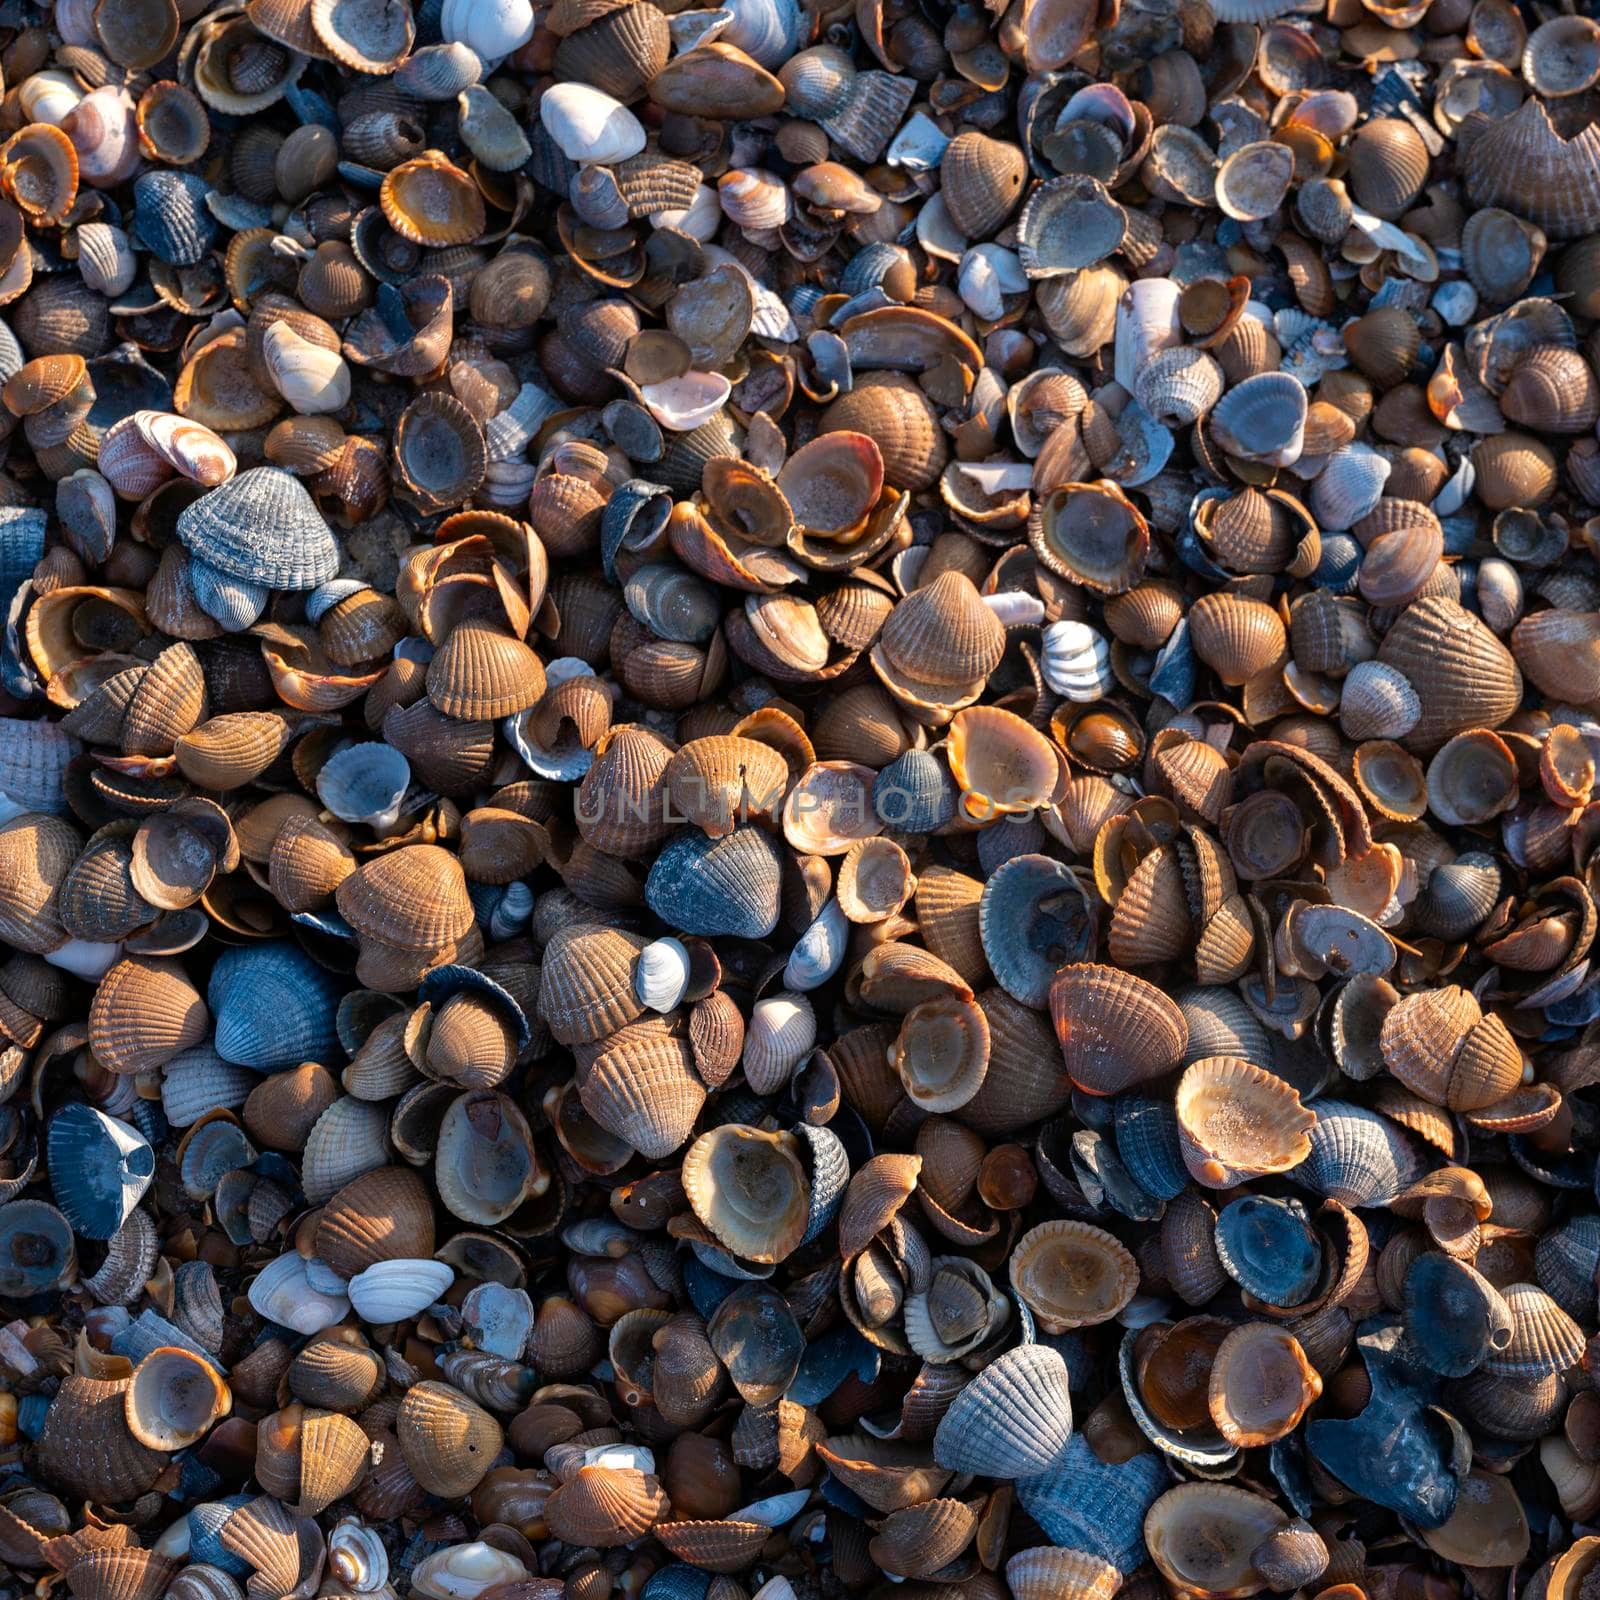 pattern formed by collection of shells on sandy beach in low afternoon sun